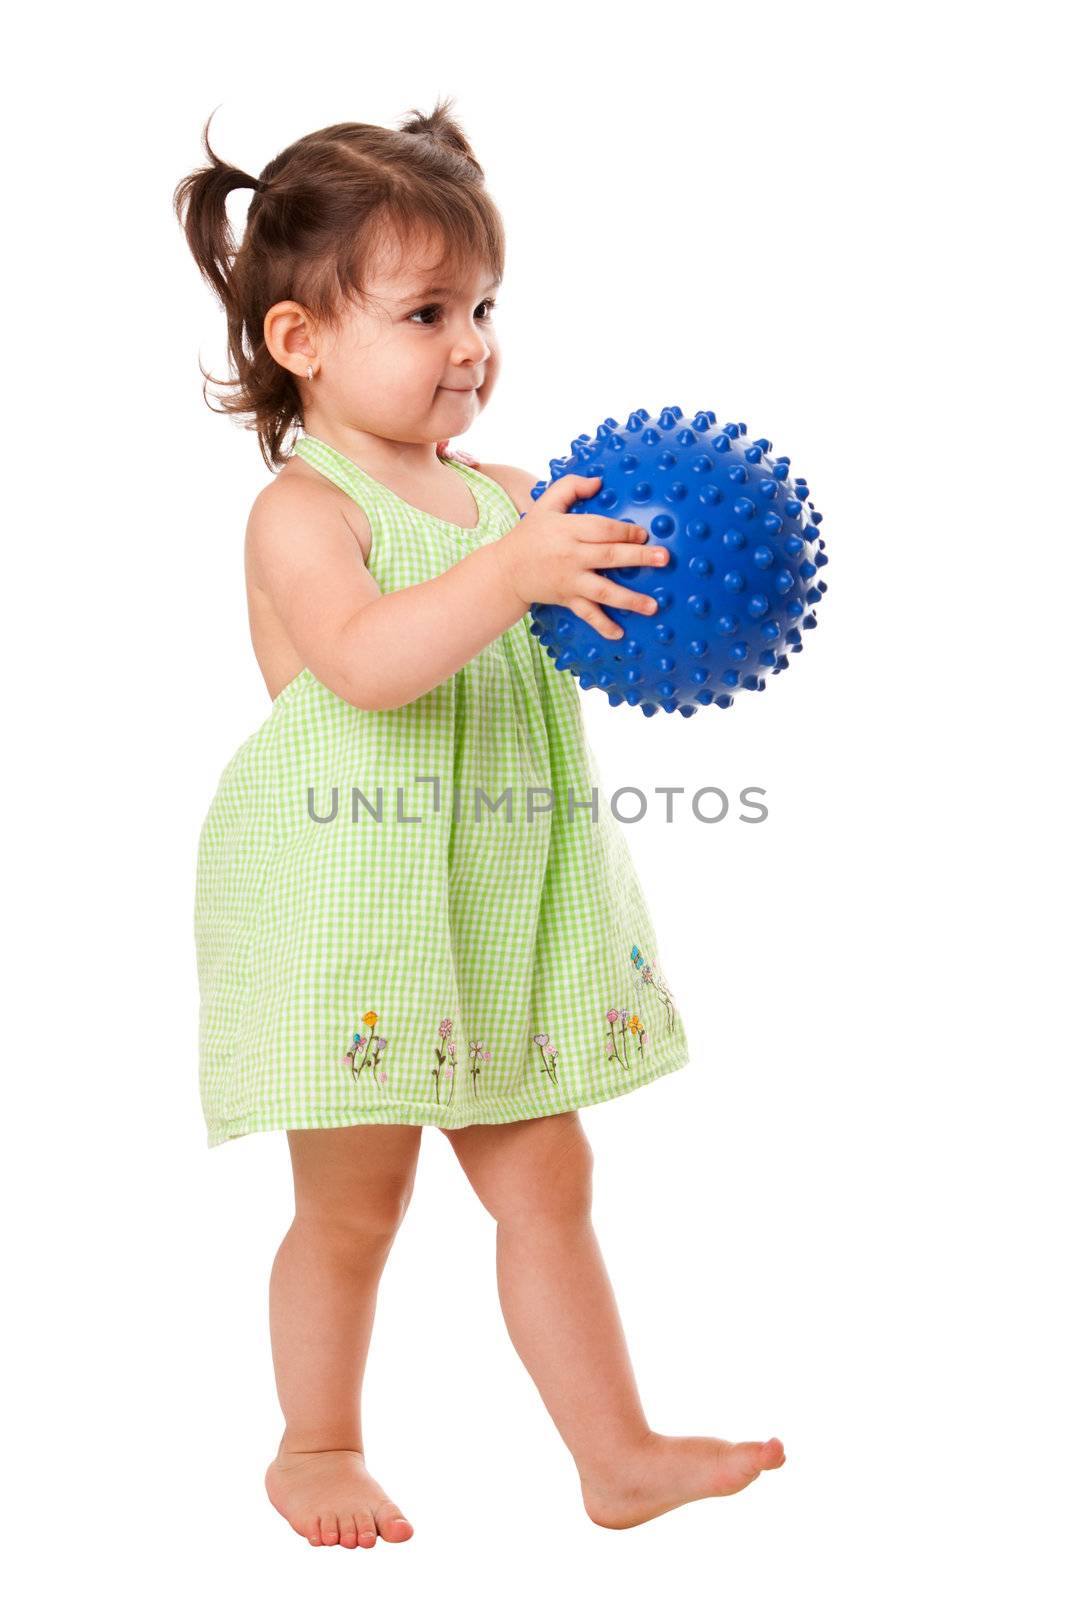 Beautiful cute happy toddler baby girl in green dress walking playing with blue spiky ball, isolated.